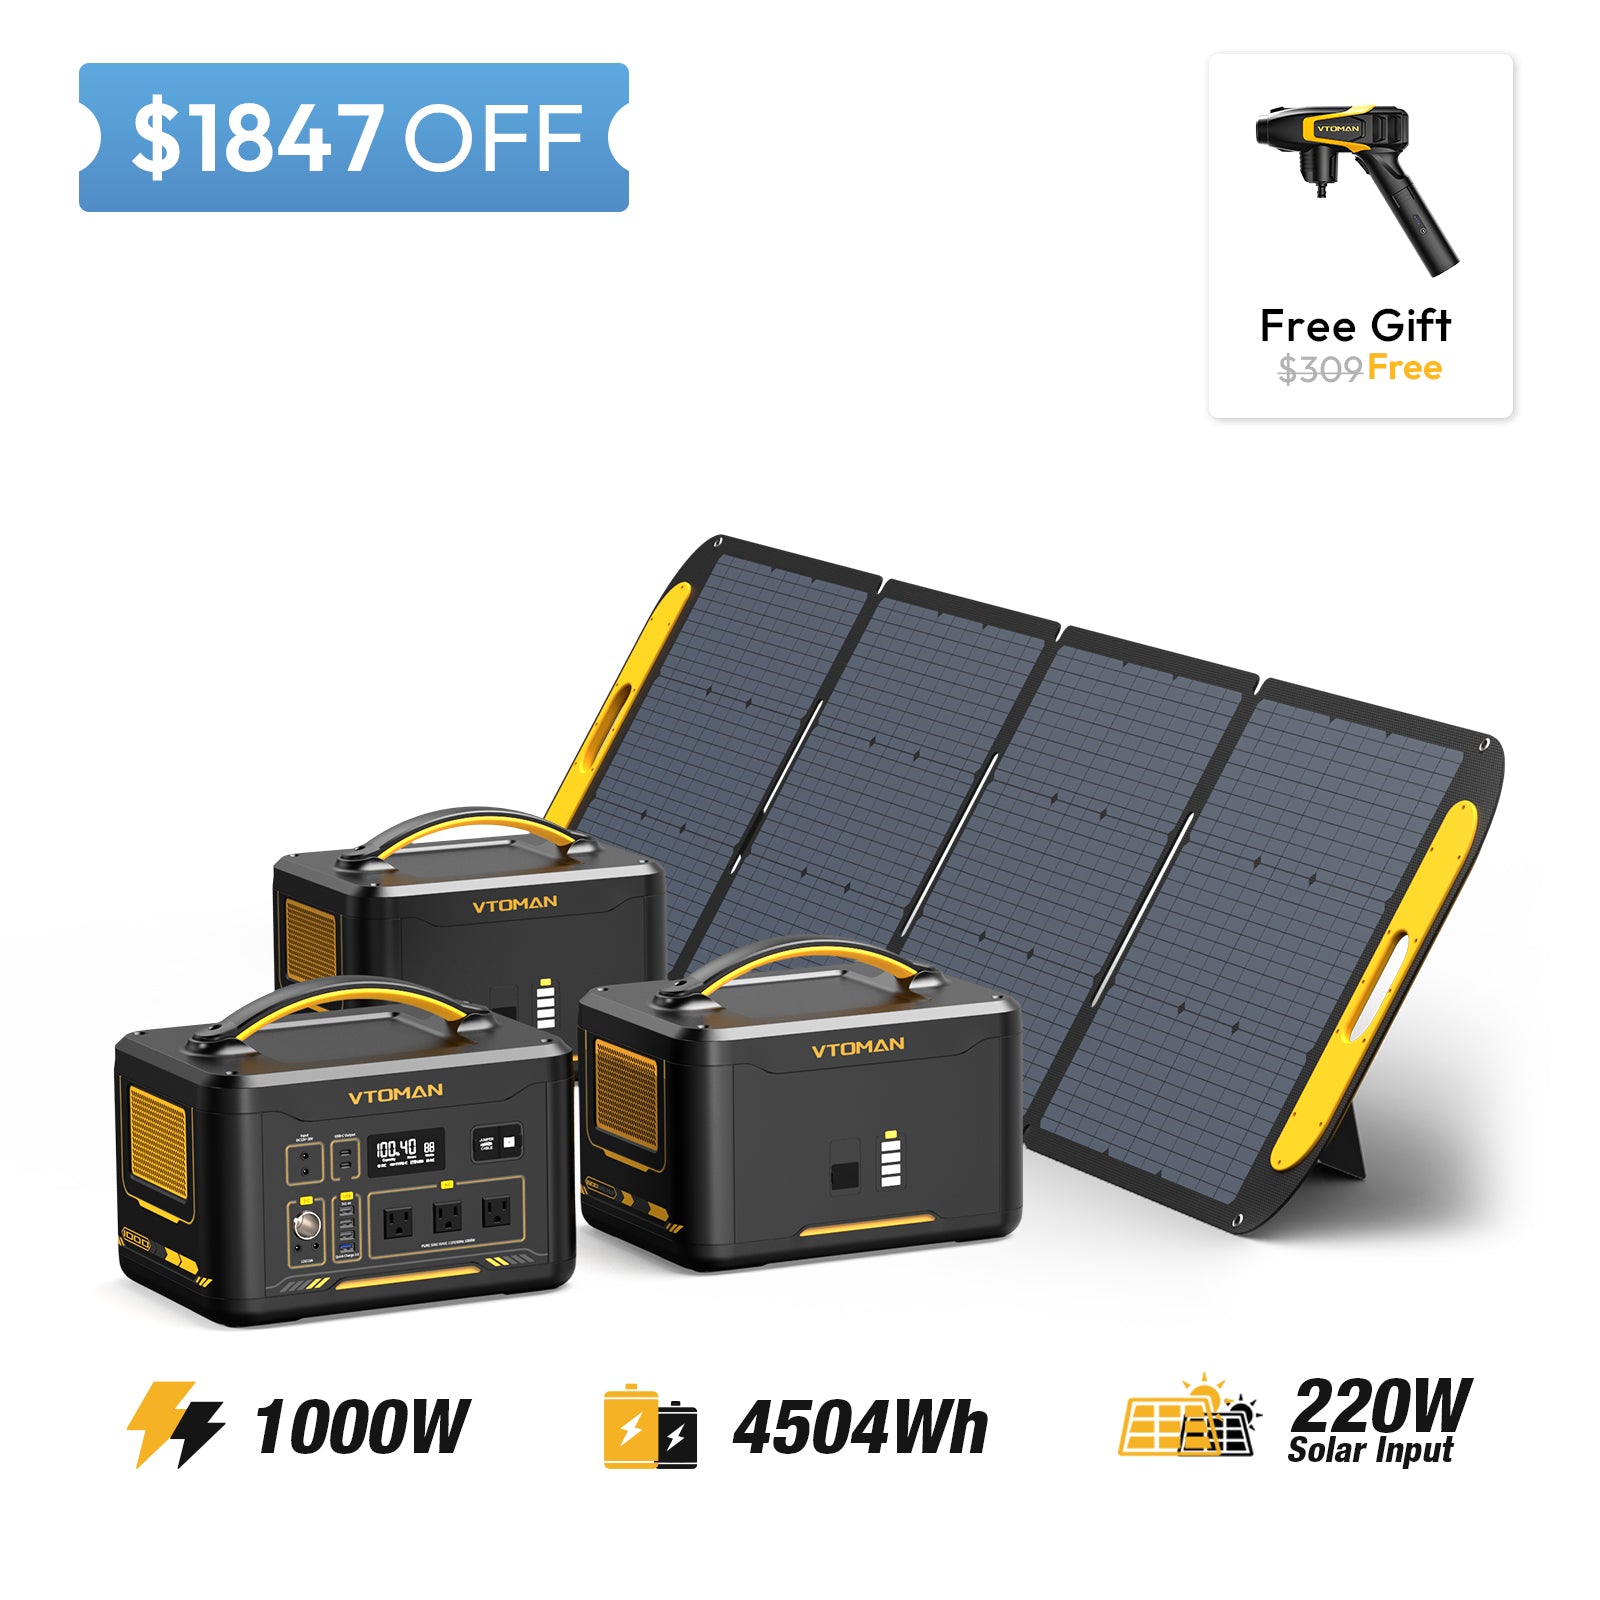 Jump 1000-1548Wh extra battery-2-220W solar panel save $1847 in summer sale